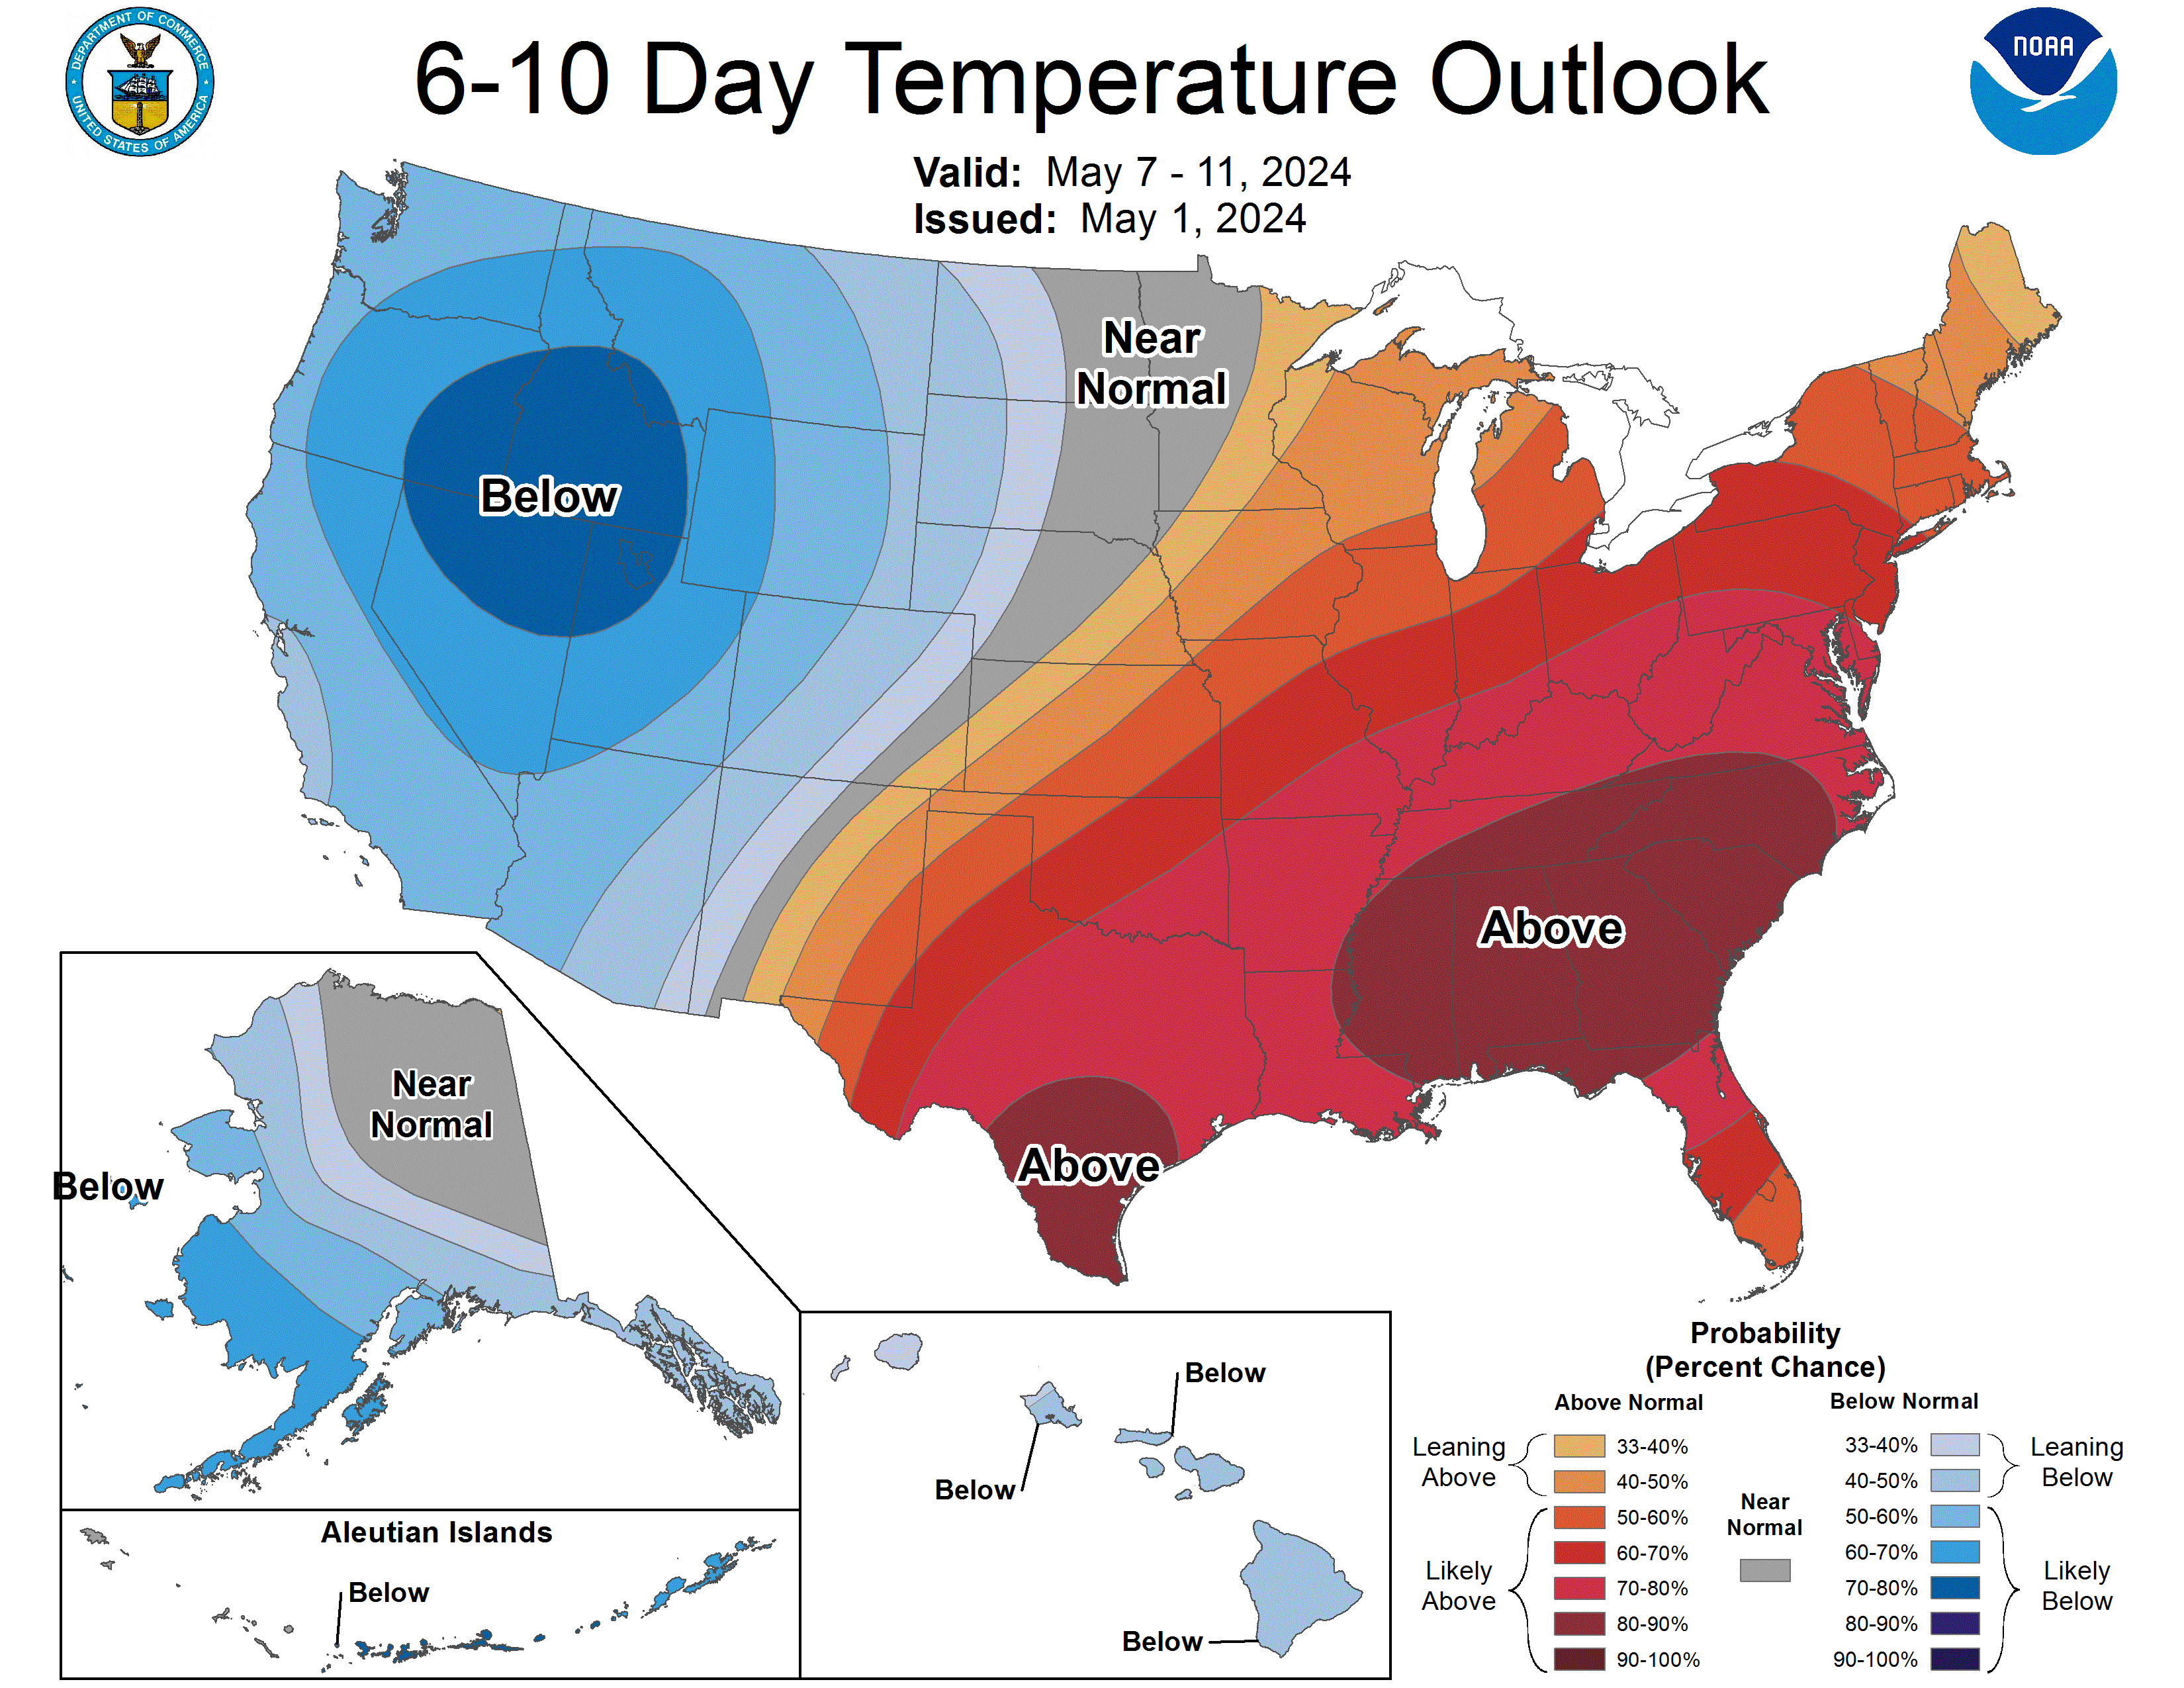 6 - 10 Day Temp Outlook